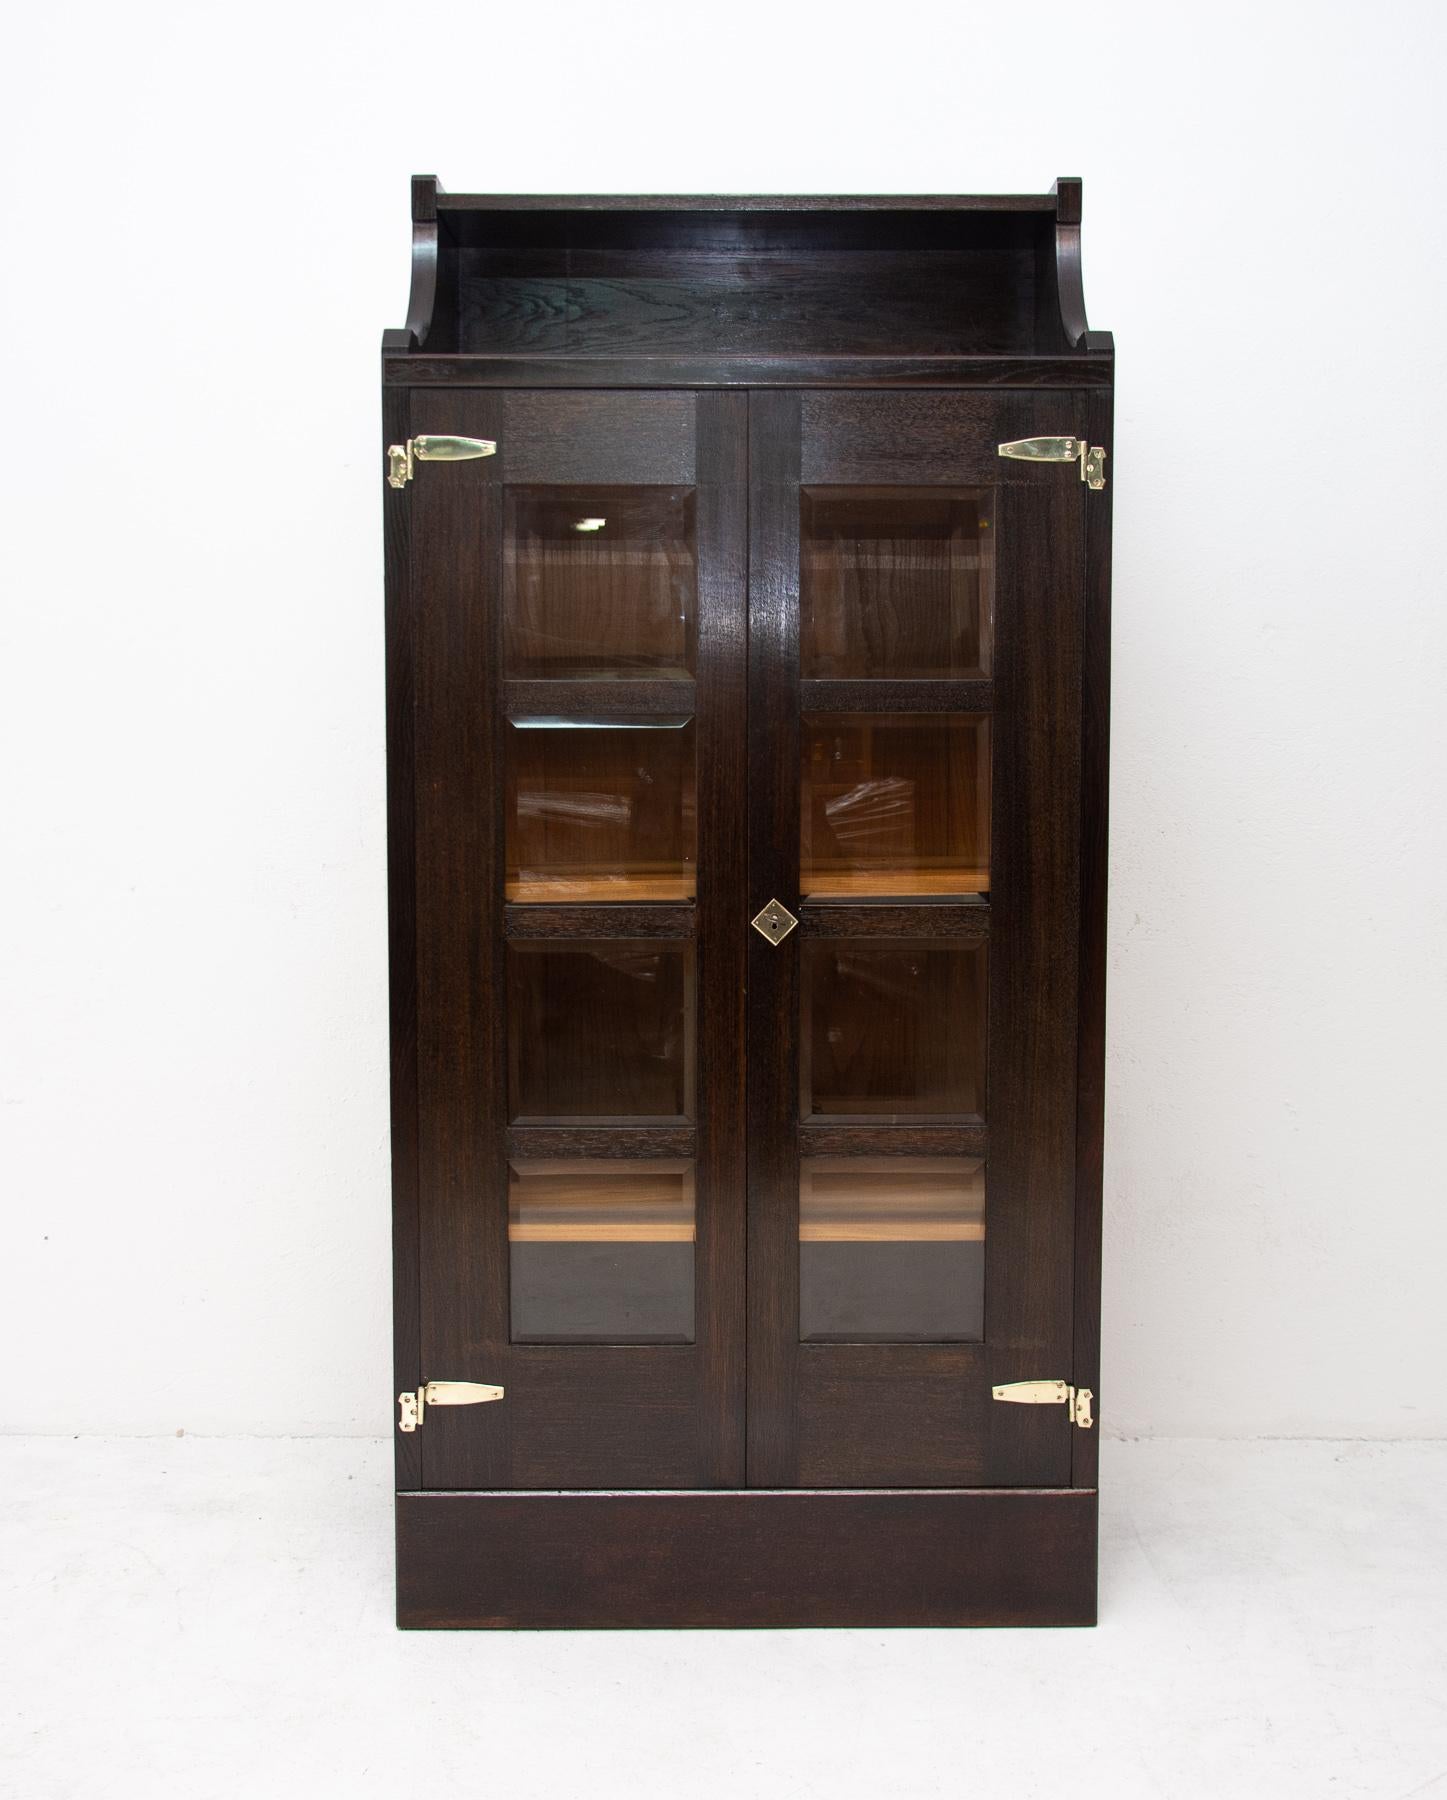 This secession cabinet was produced in Austria-Hungary, circa 1910. It is made of dark stained oakwood. It features storage at the top. It has a beautiful brass fittings with decorative Art Nouveau elements that have been completely cleaned. The